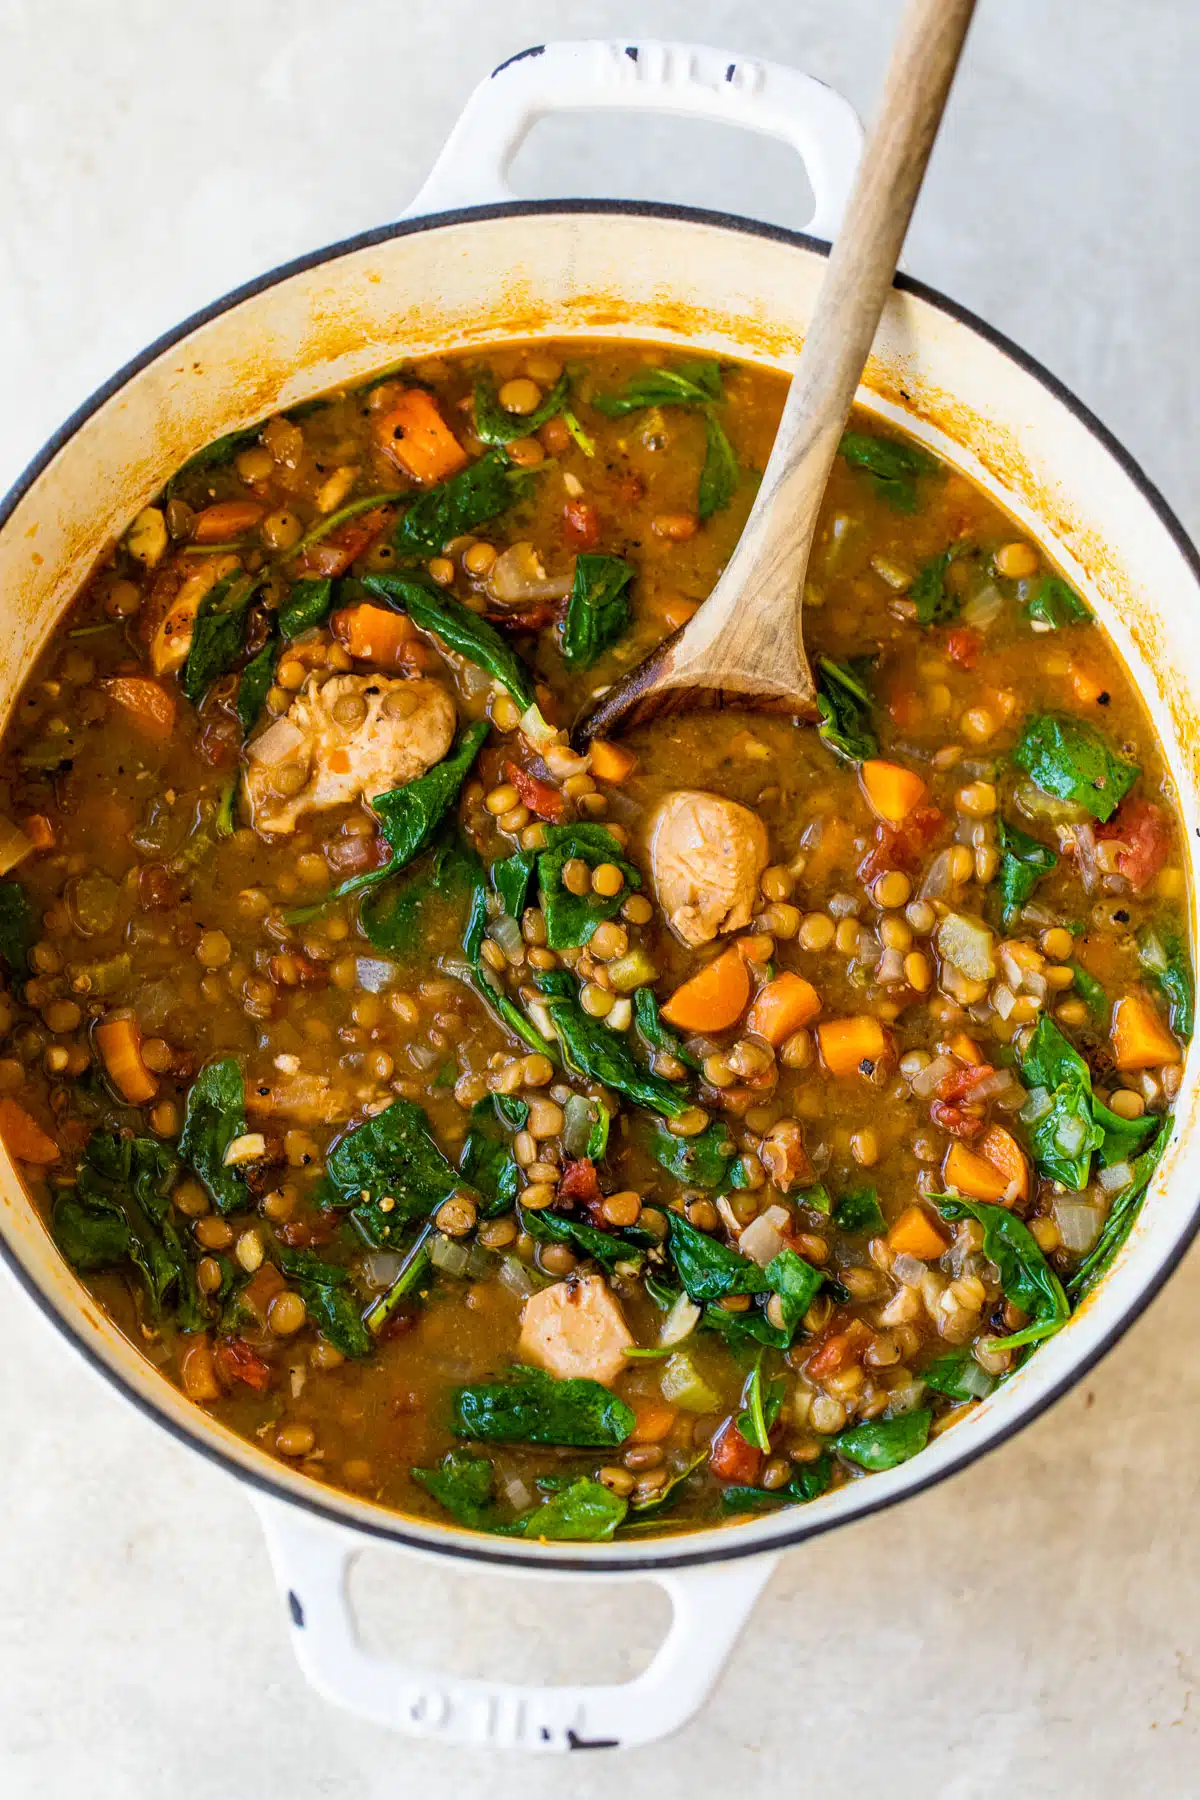 dutch oven of soup with chicken, green lentils and spinach